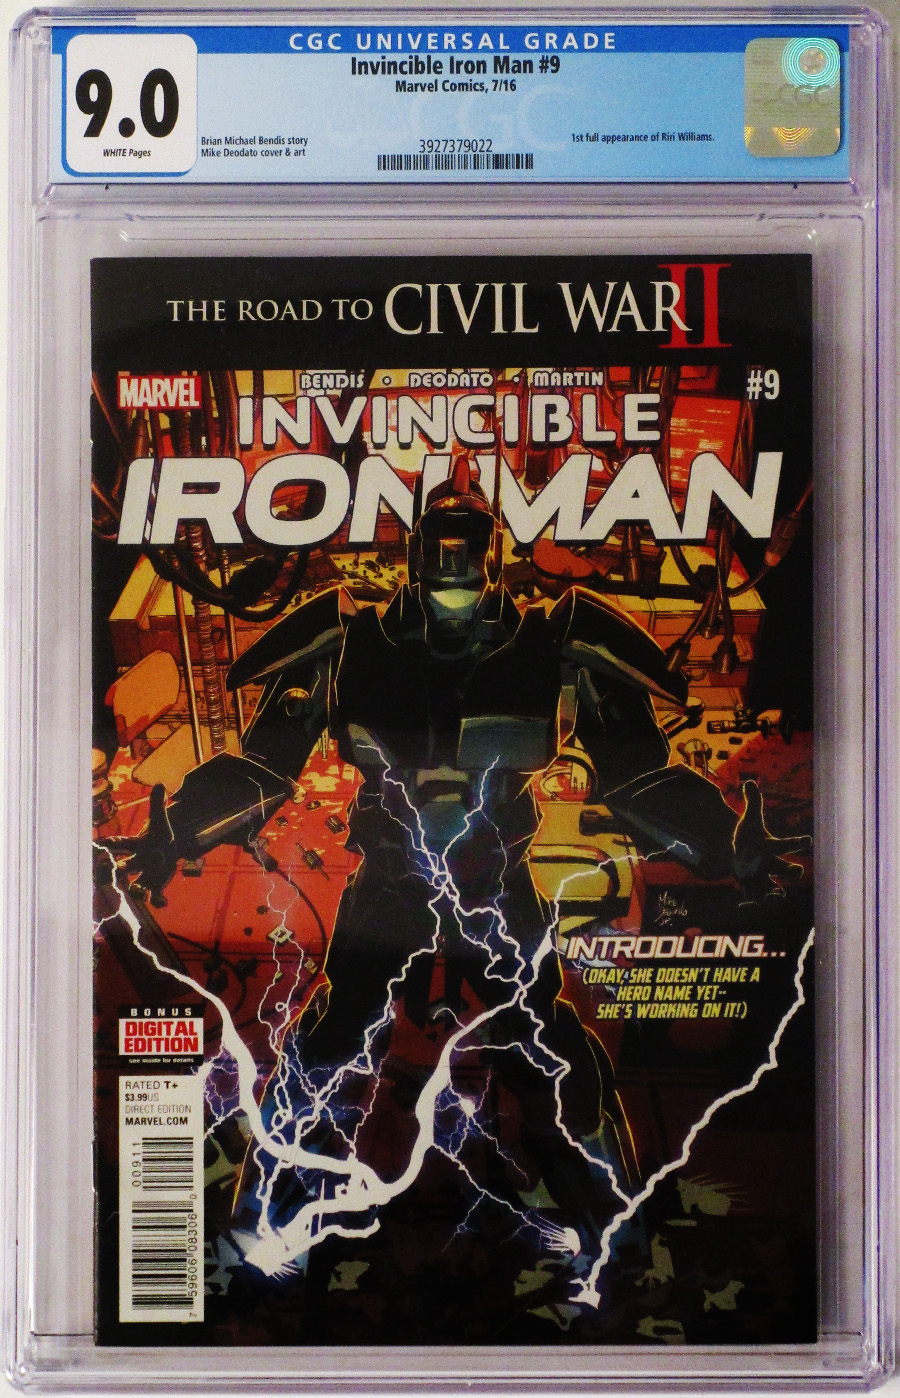 Invincible Iron Man Vol 2 #9 Cover D 1st Ptg Regular Mike Deodato Jr Cover (Road To Civil War II Tie-In) CGC 9.0